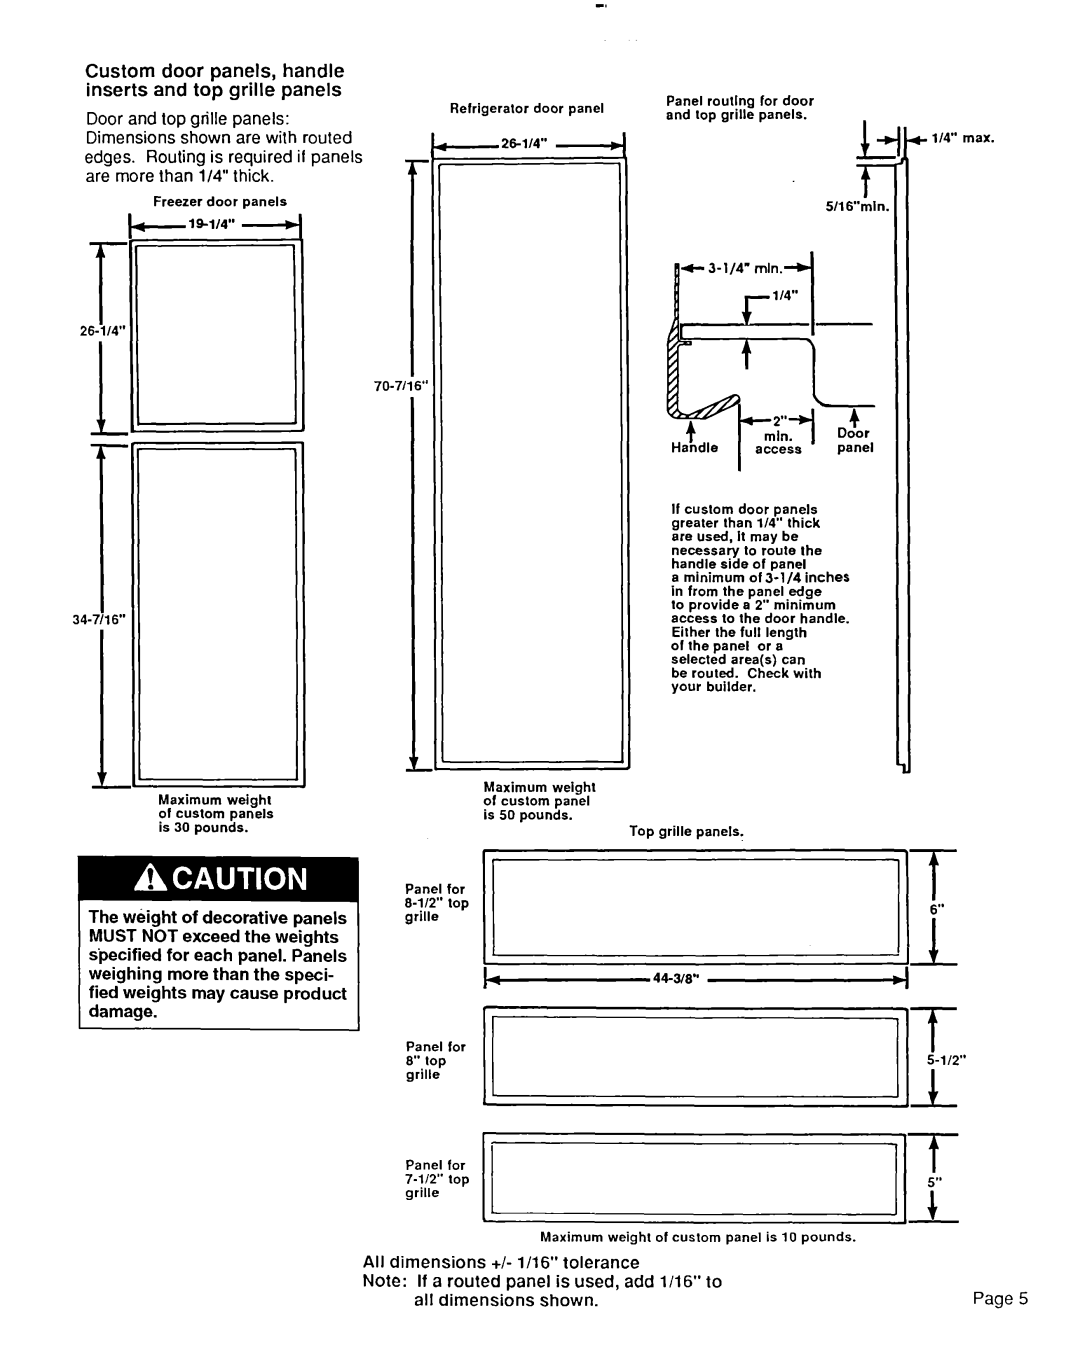 KitchenAid S-302 installation instructions Custom door panels, handle inserts and top grille panels 